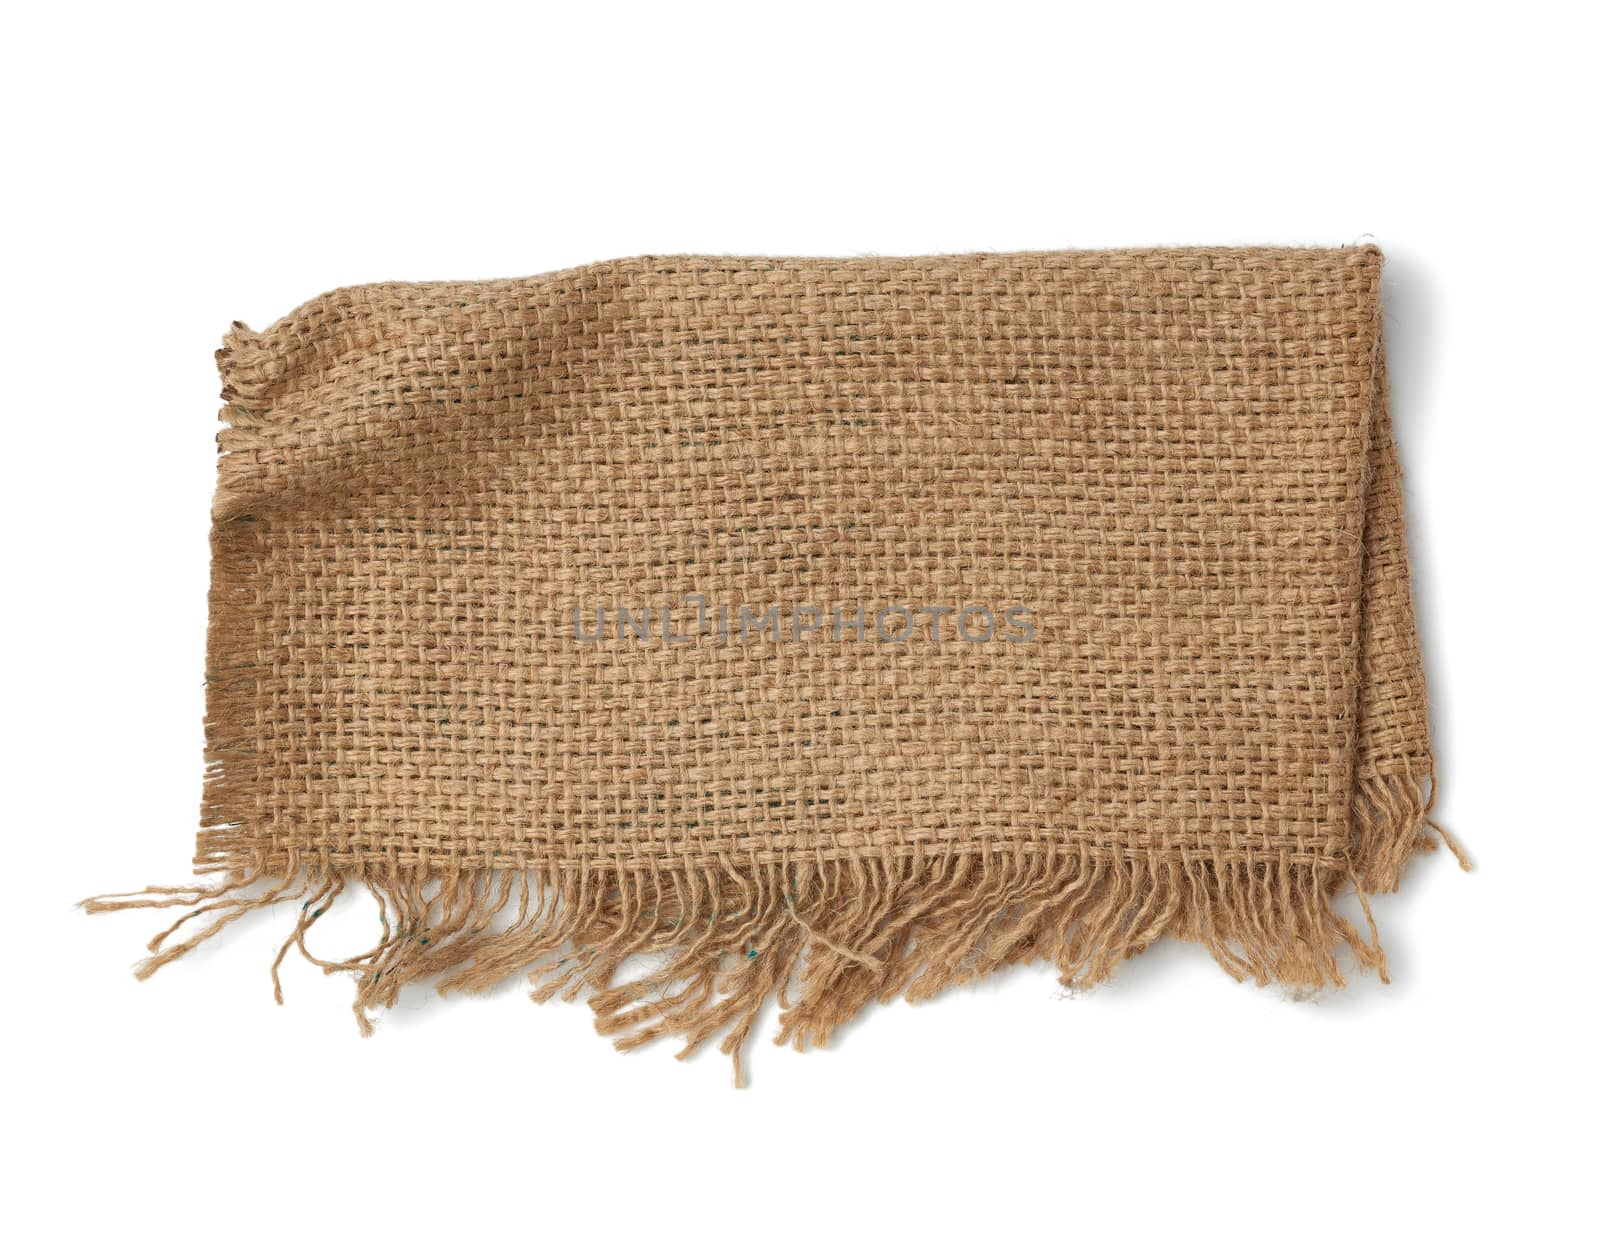 brown burlap fragment isolated on white background, top view